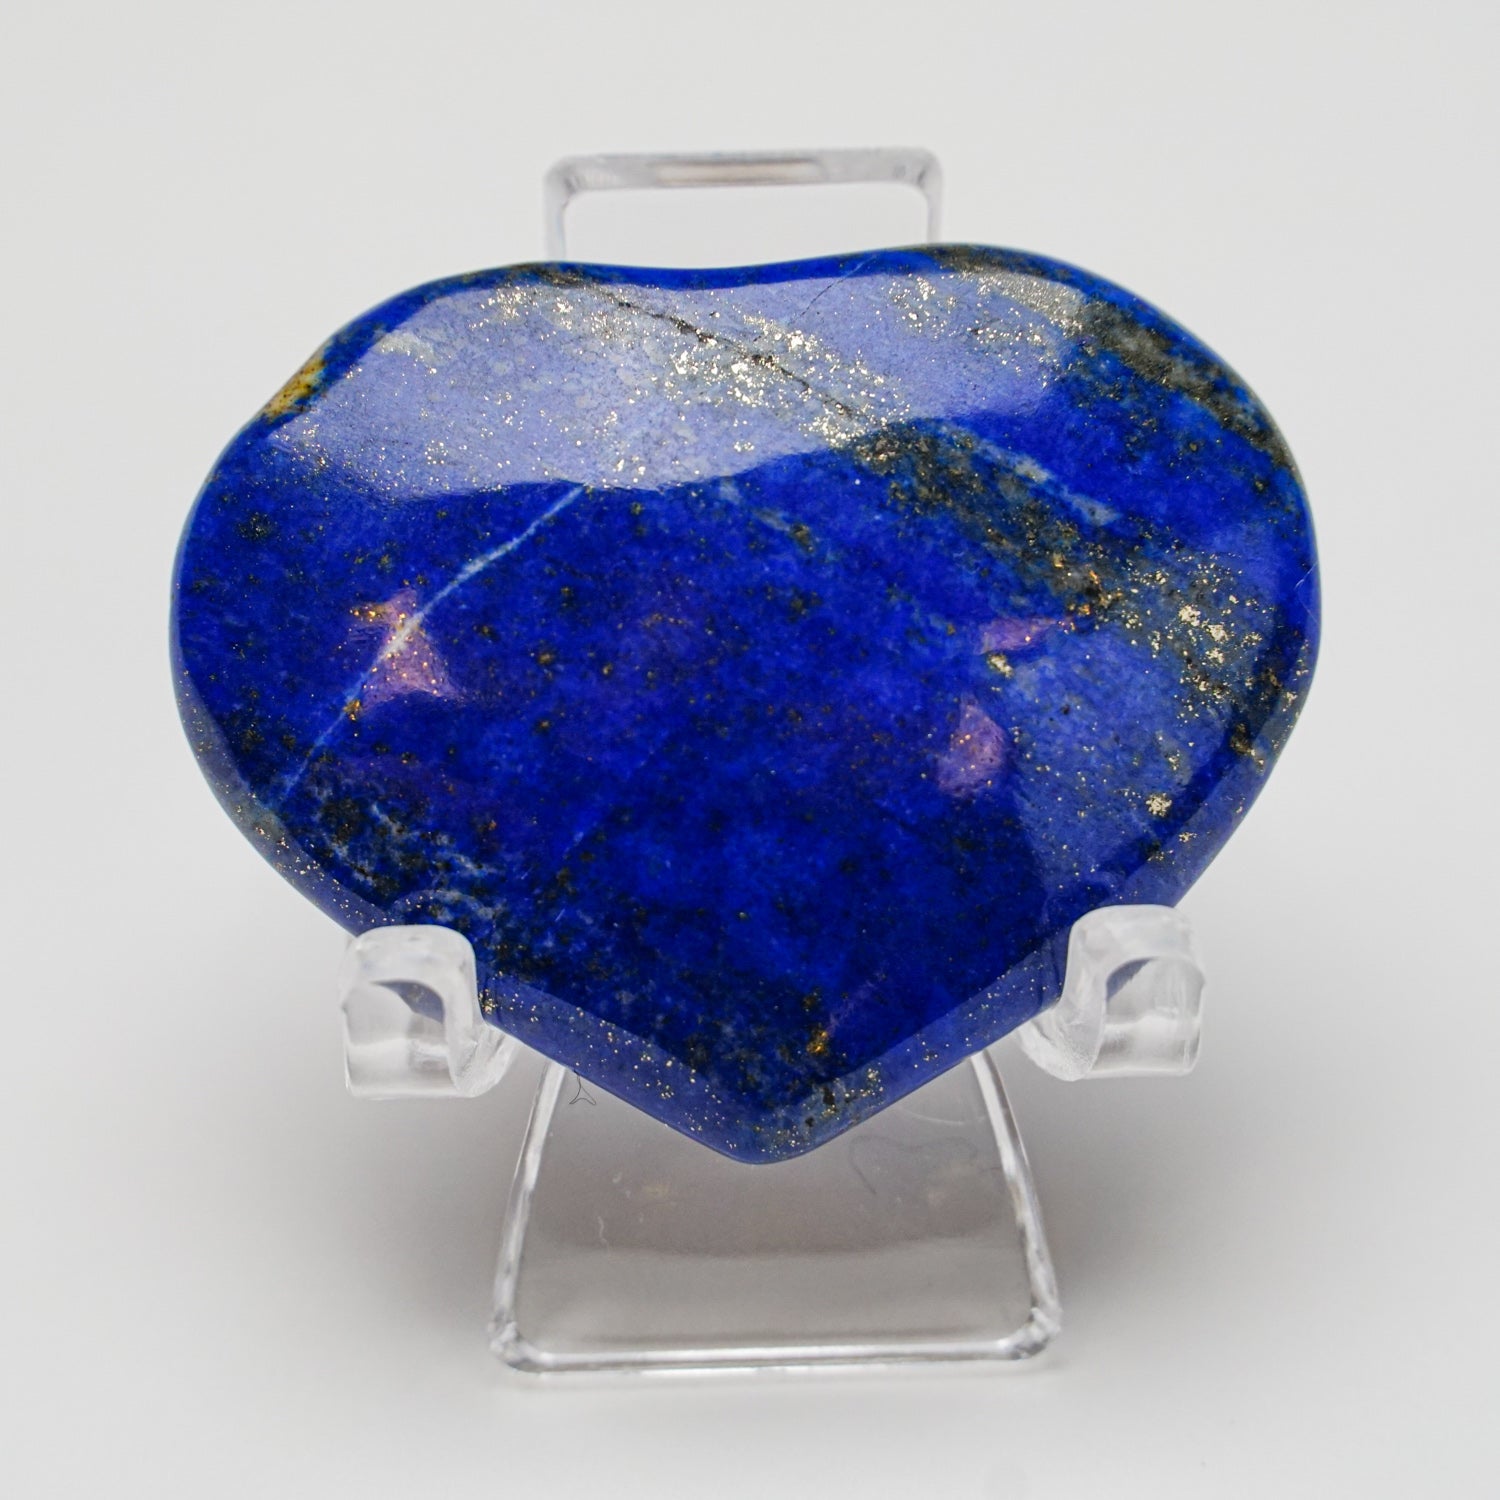 Polished Lapis Lazuli Puff Heart from Afghanistan (10 grams)